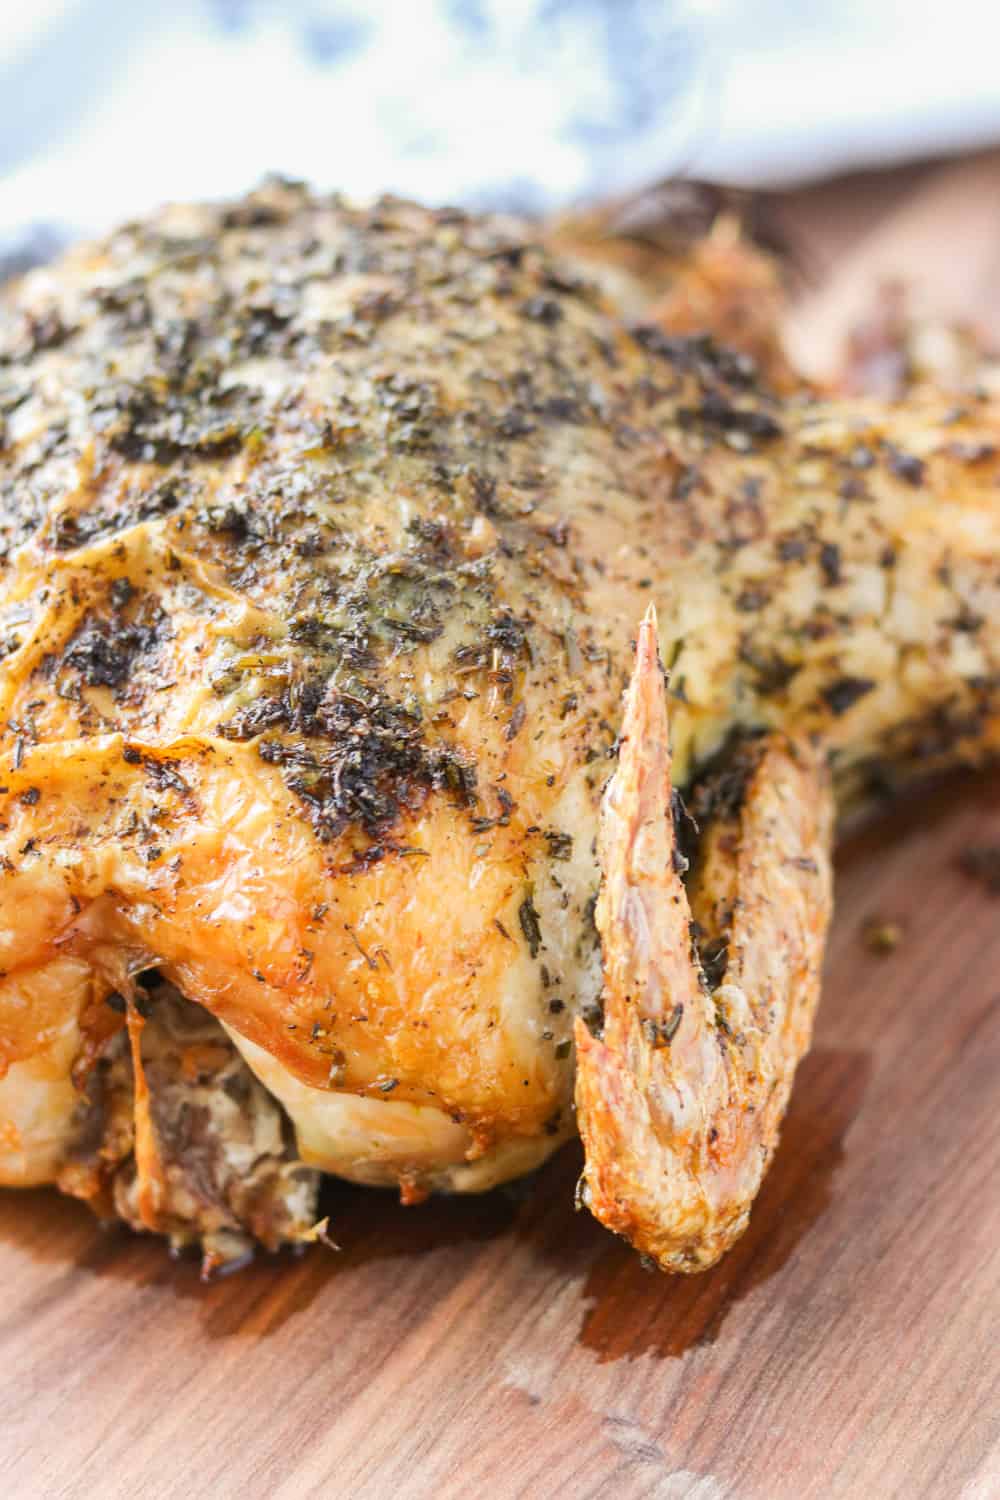 Roast chicken with herbs and lemon.